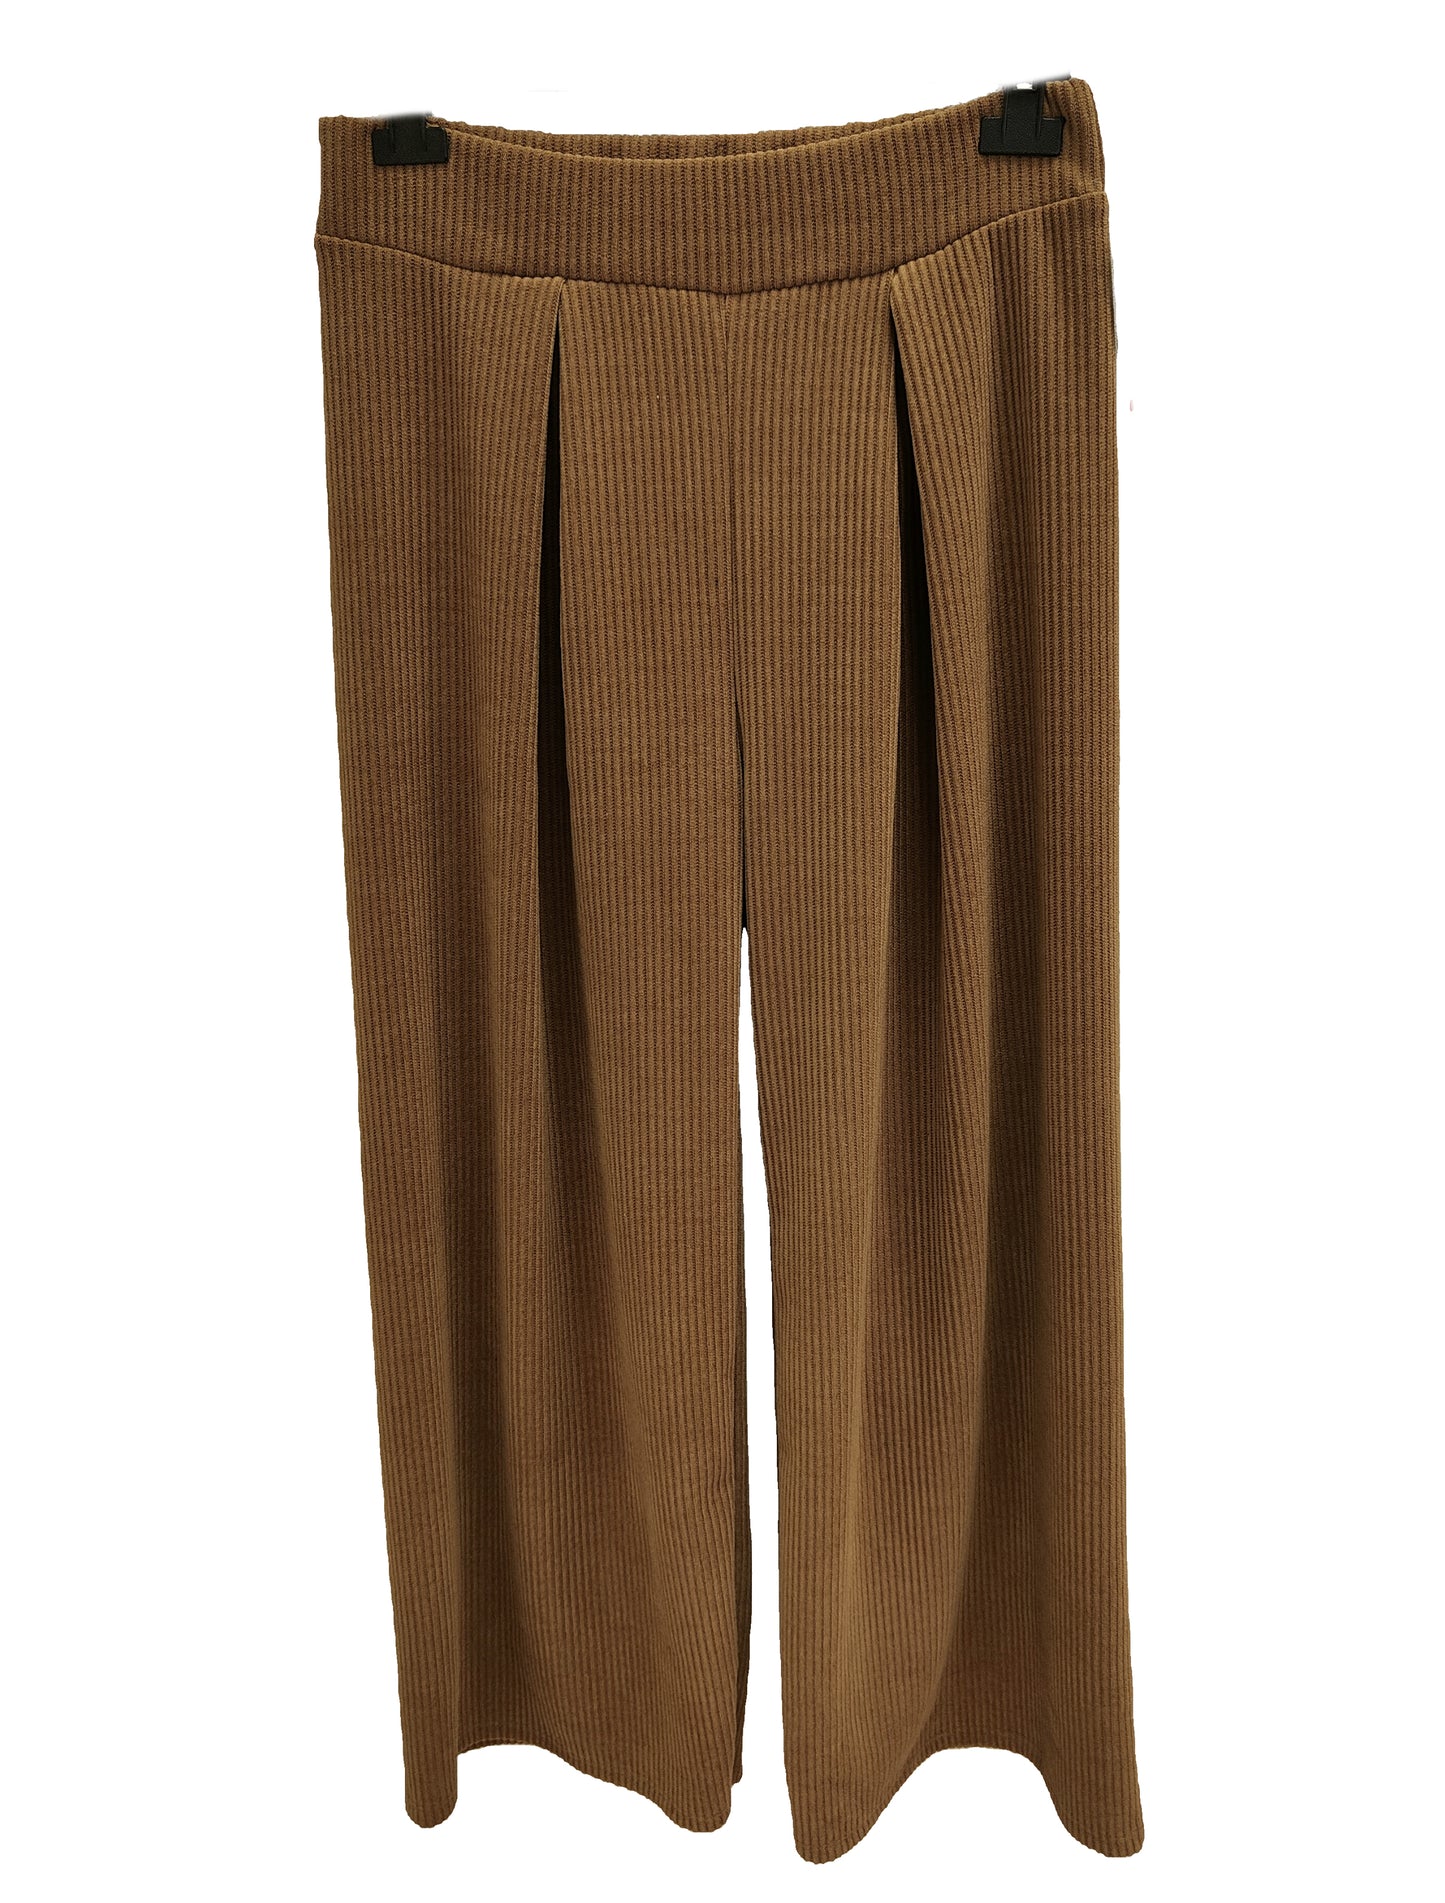 Cord trousers